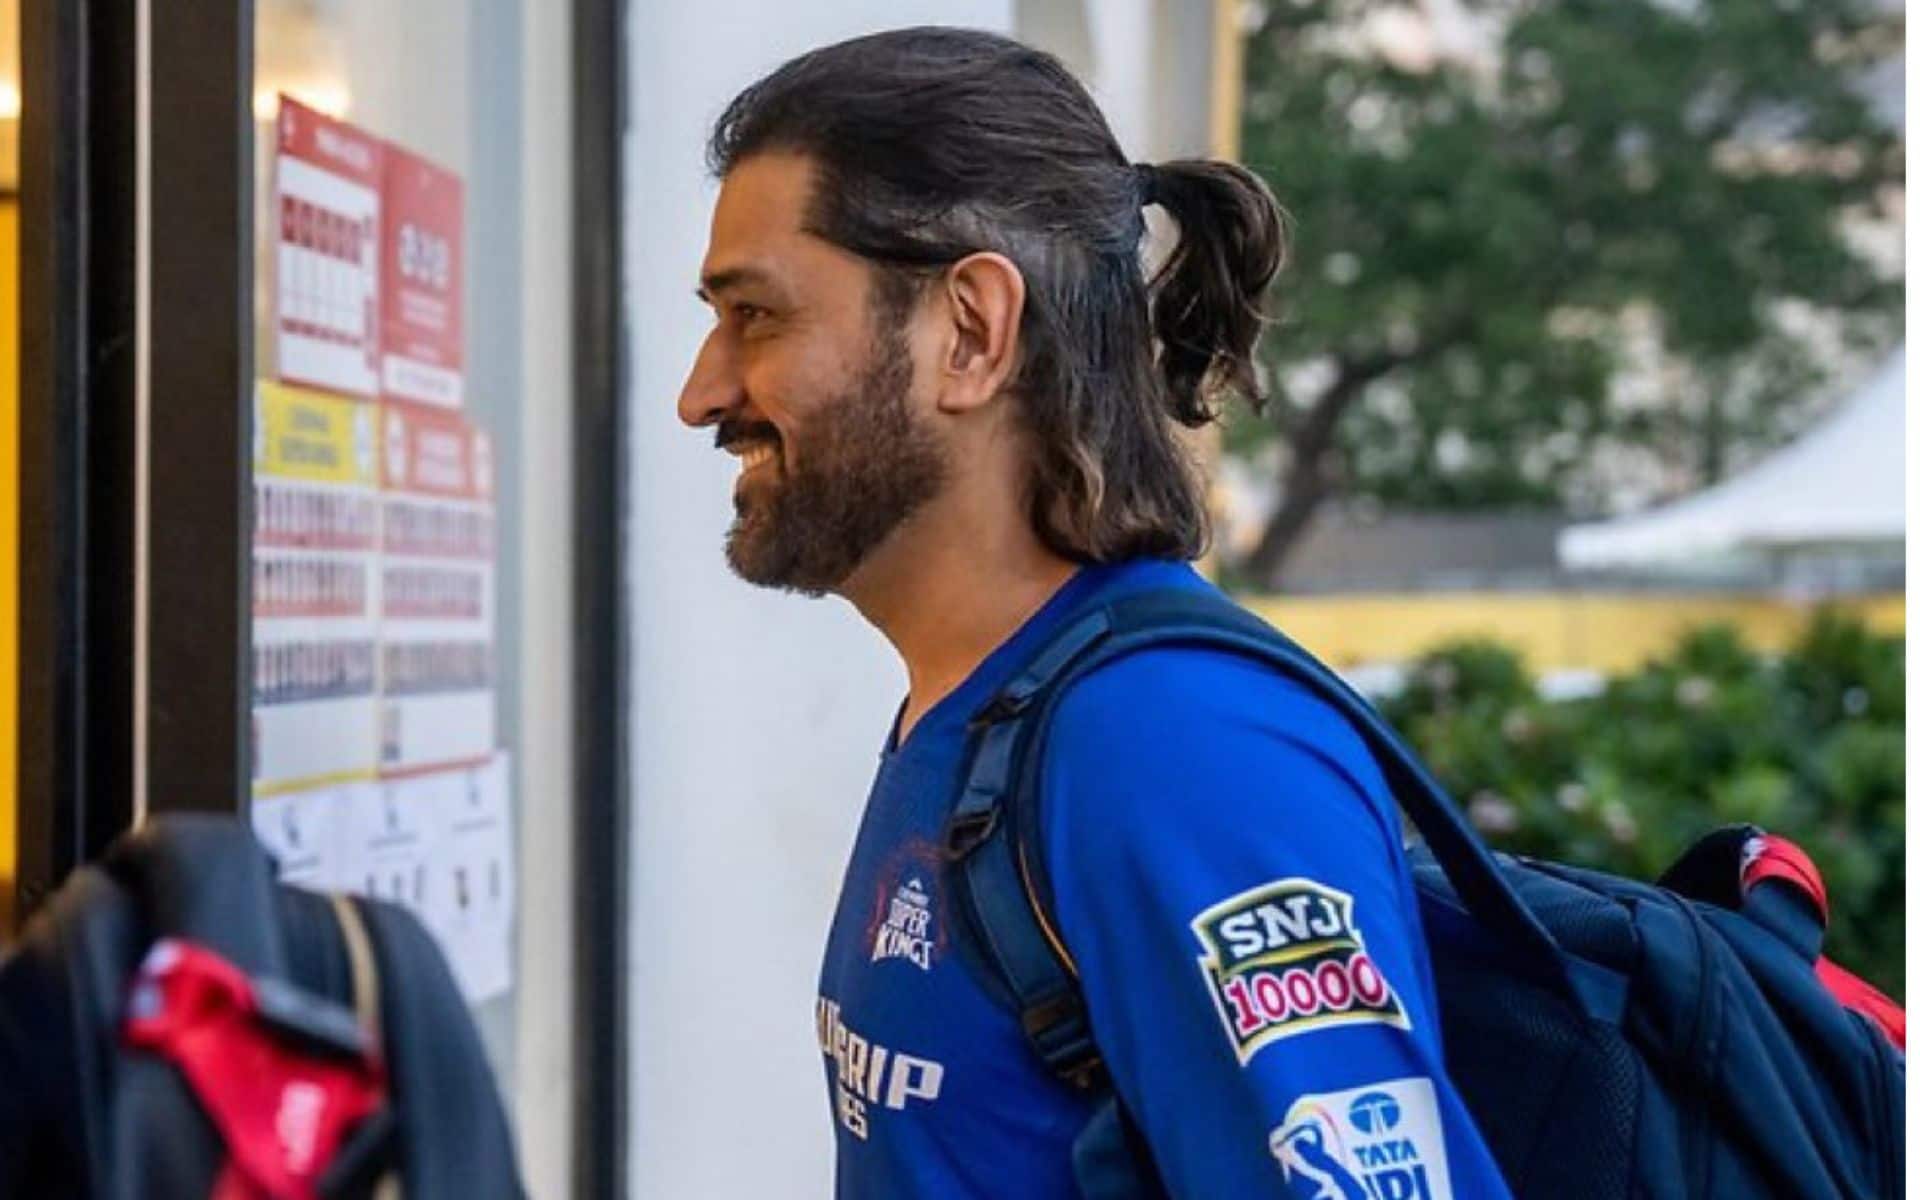 MS Dhoni ponytail hairstyle (X.com)